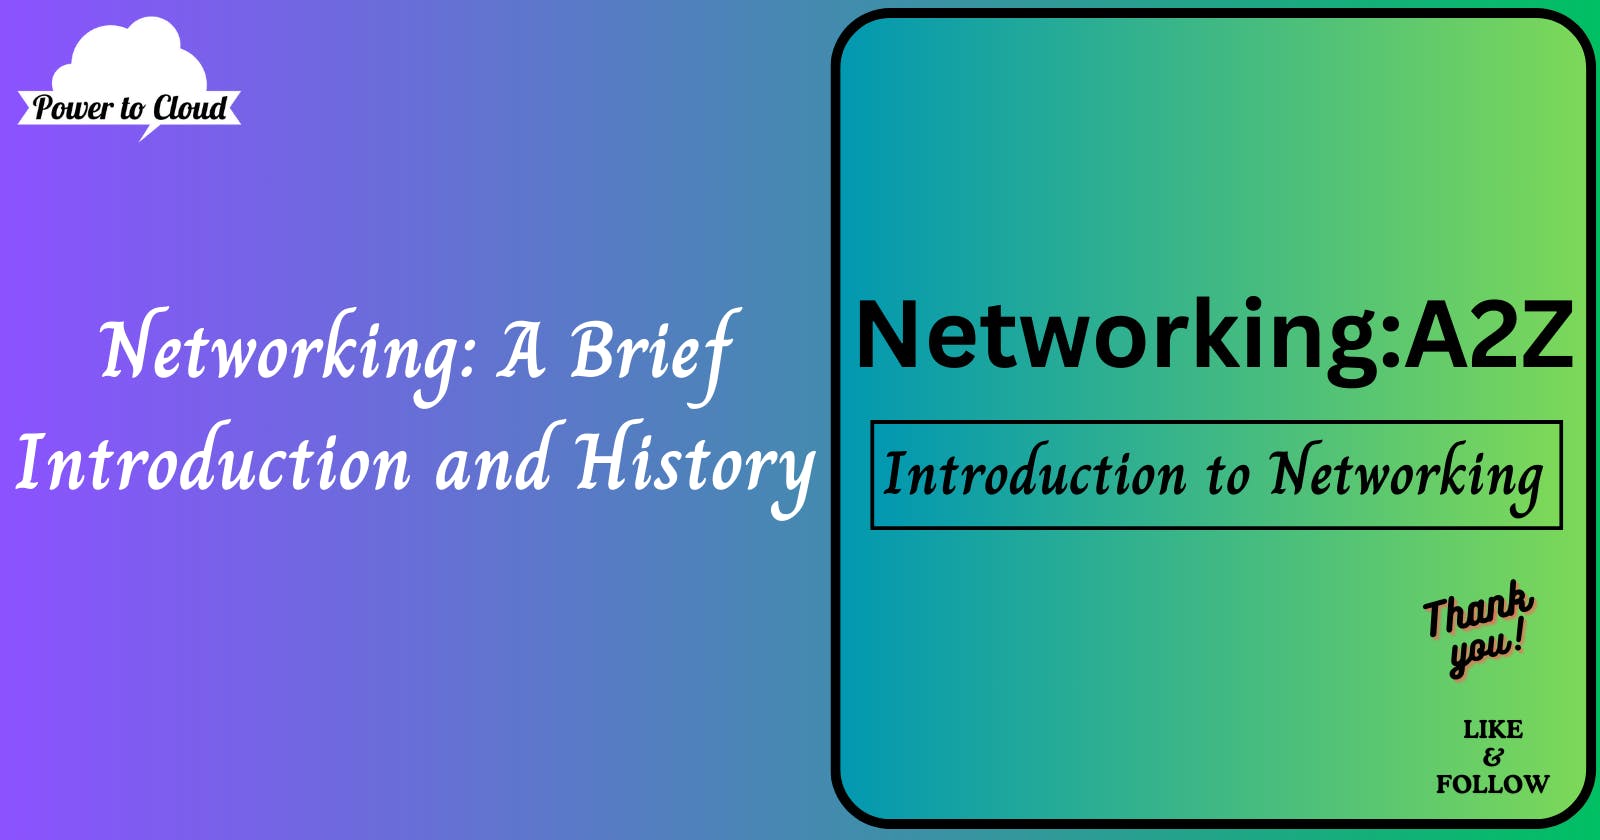 1.1 Networking: A Brief Introduction and History